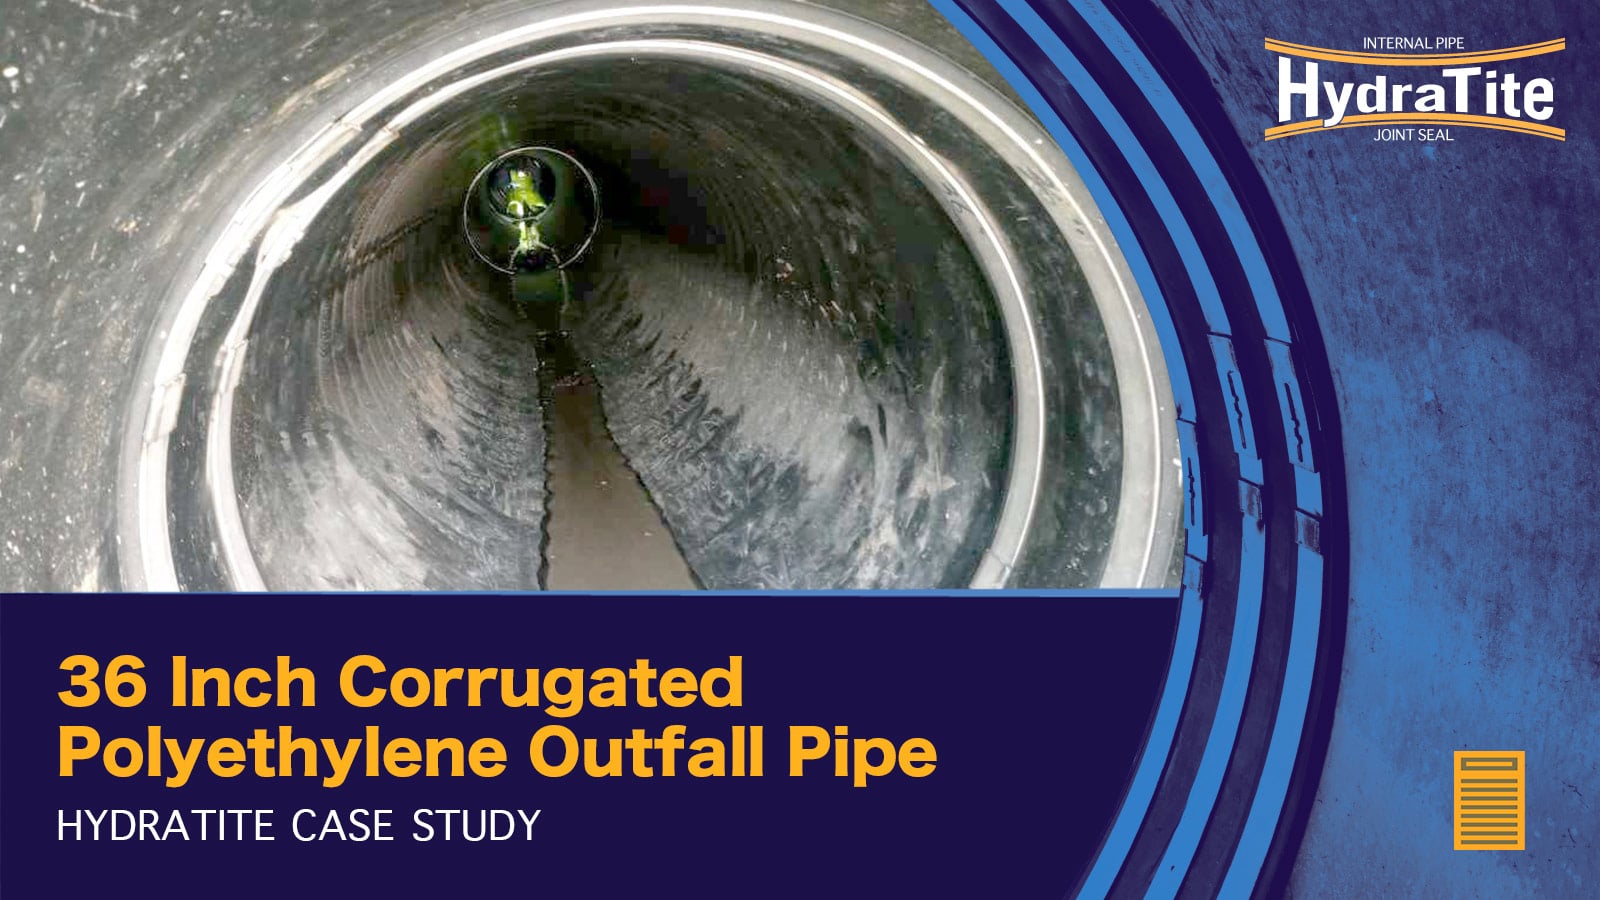 HydraTite eliminating infiltration at a joint, "36" Corrugated Polyethylene Outfall Pipe, HydraTite Case Study"